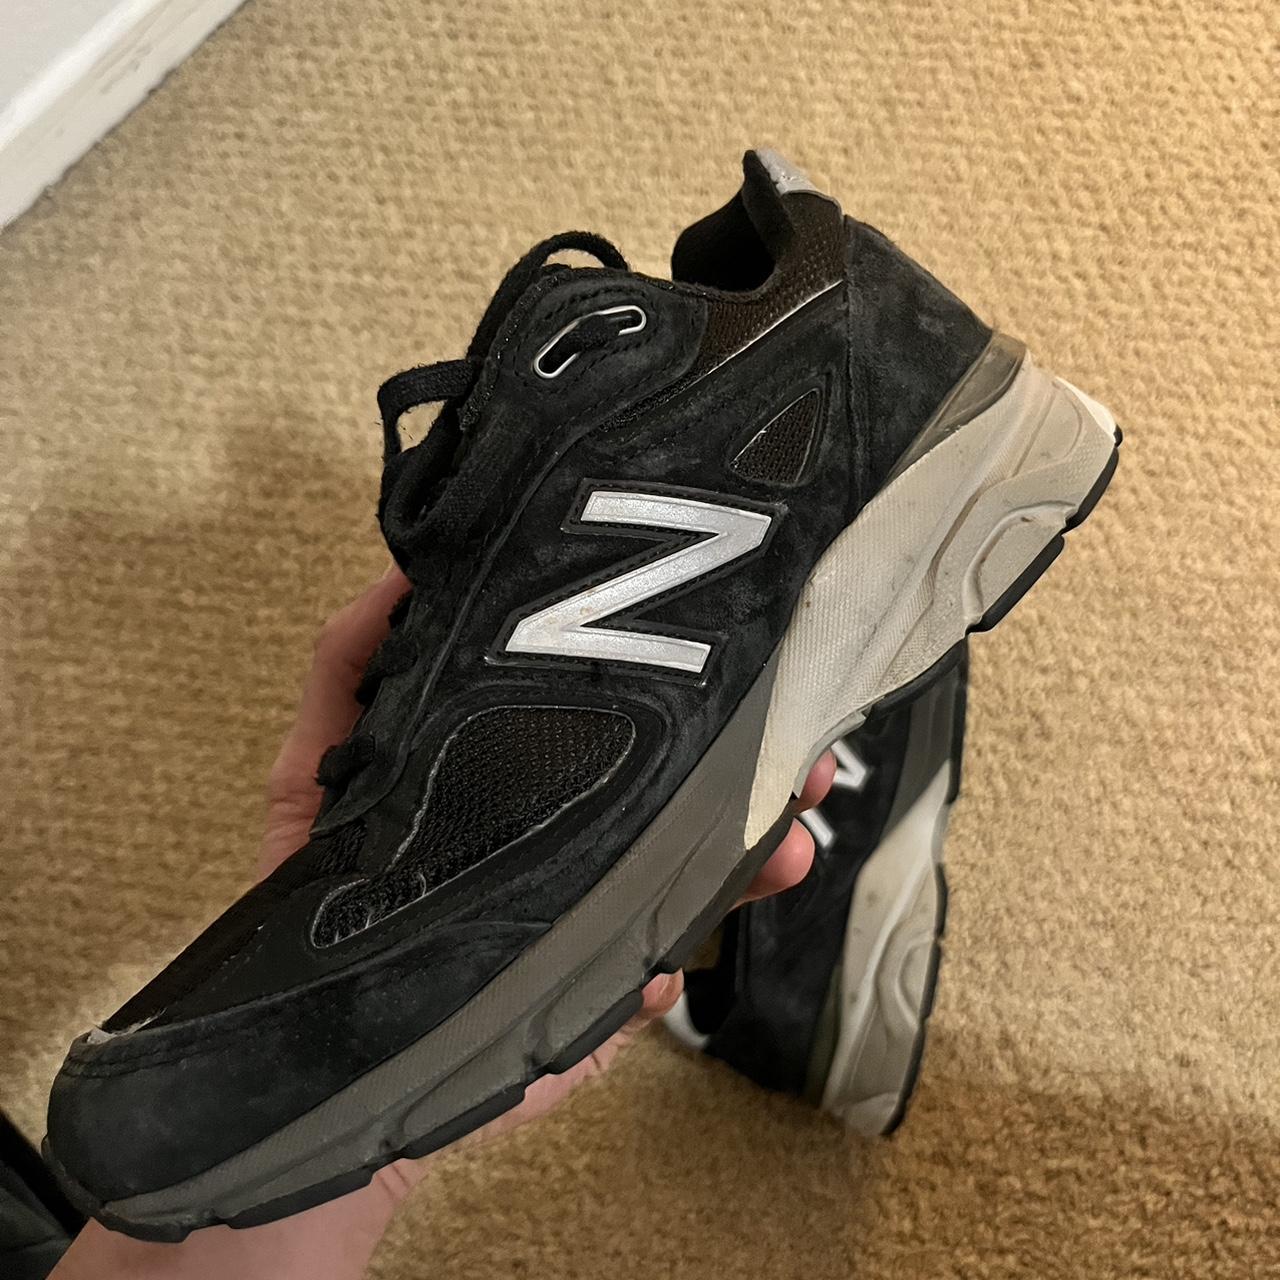 New Balance 990V4, -Good Used Condition, Needs A...